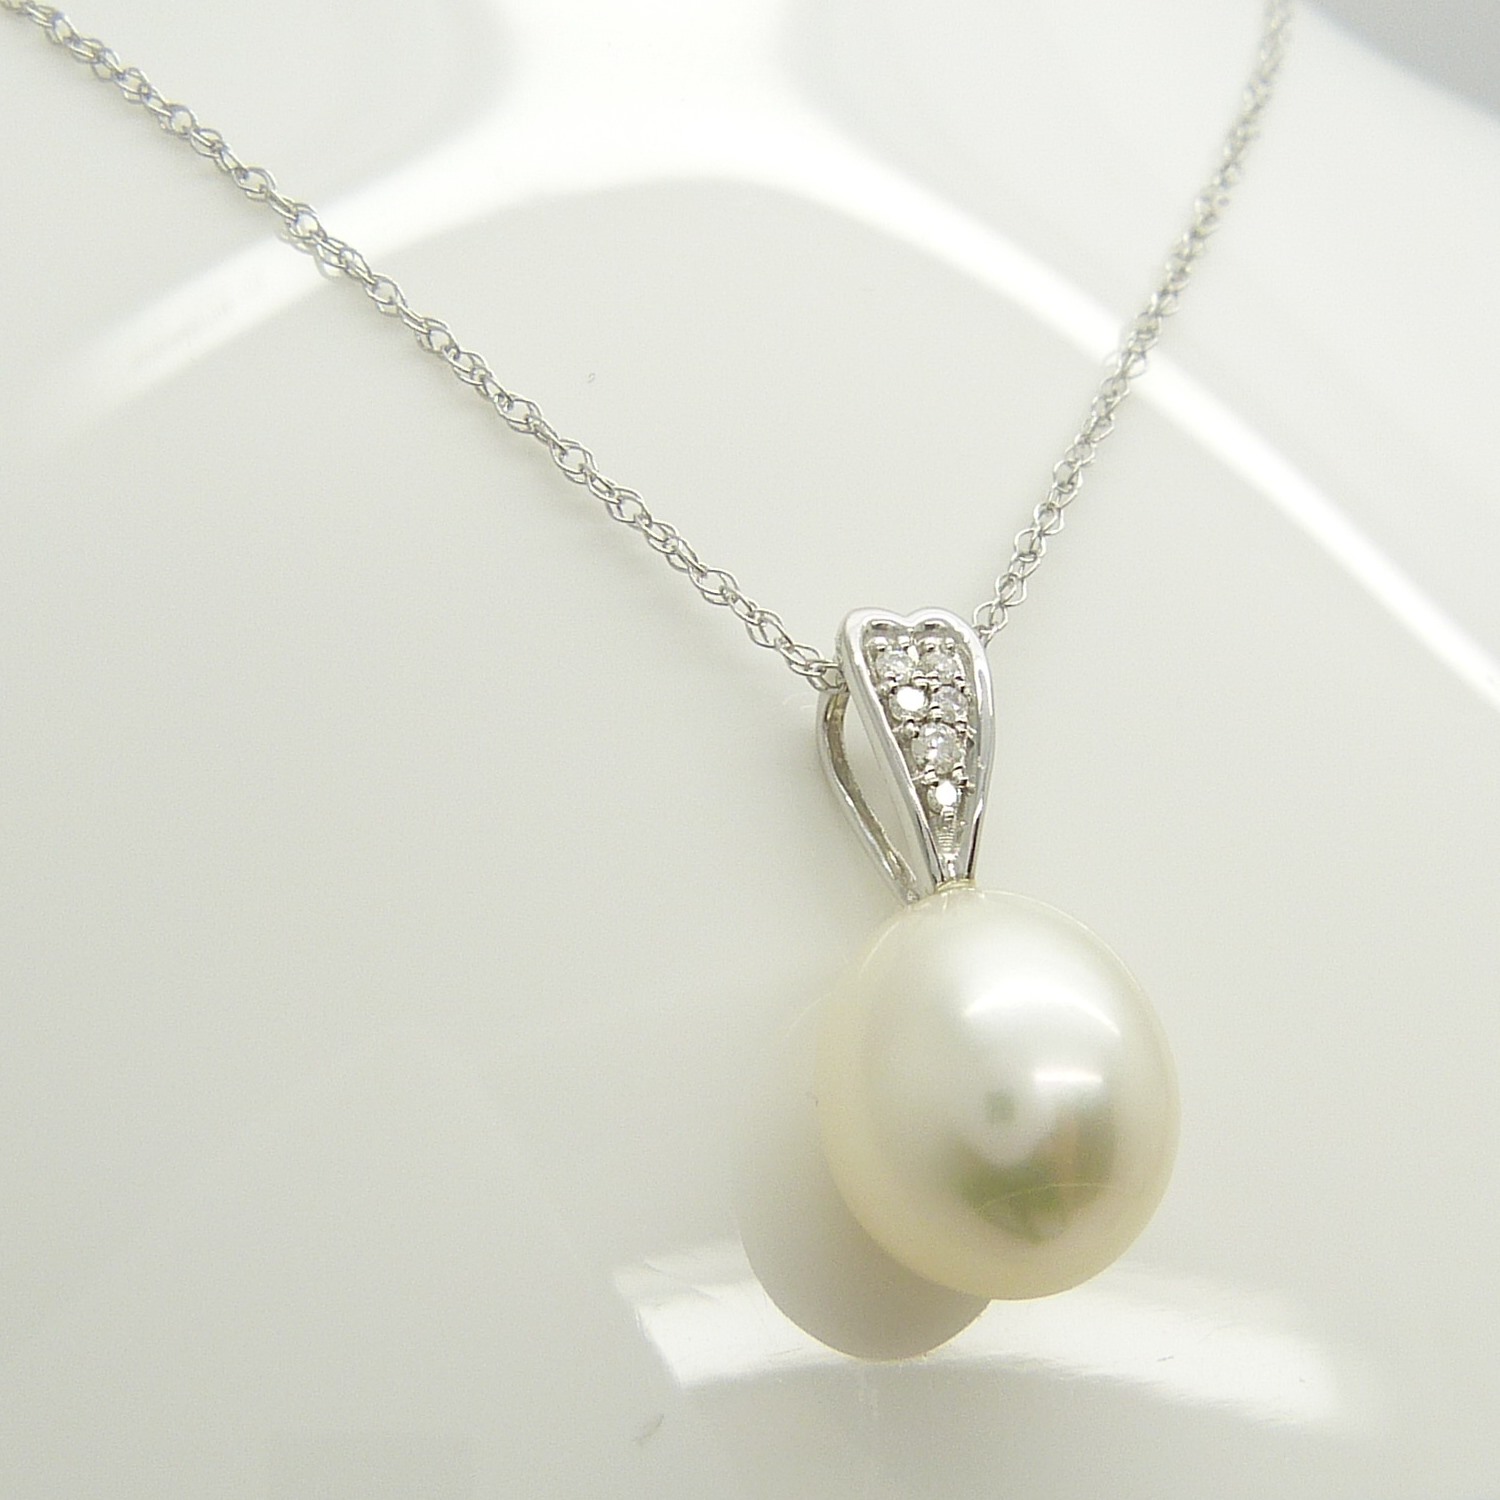 White Gold Necklace. Pendant Features An Oval Cultured Pearl and Diamond-Set Bale - Image 2 of 6